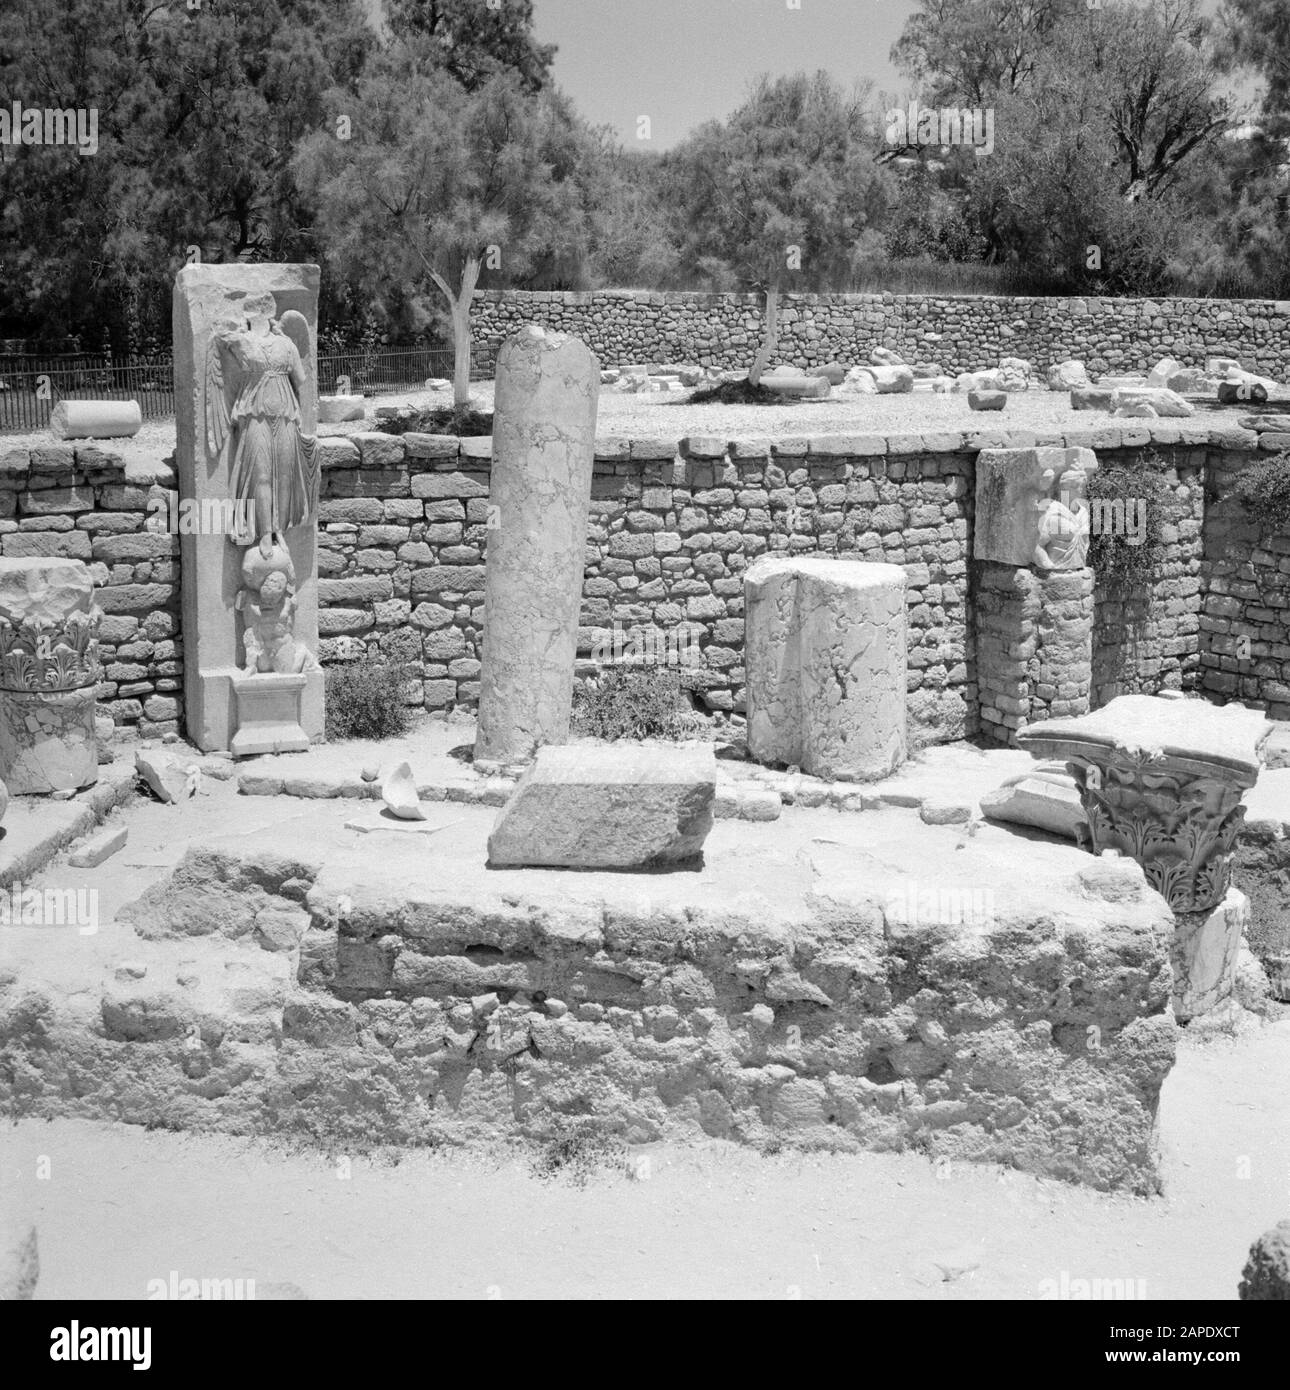 Israel 1964-1965: Ashkelon, archaeology Description: Archaeological site with building fragments including a statue of the goddess of victory Nike or Victoria Annotation: Ashkelon is a seaside resort in the southwest of Israel, located on the Mediterranean Date: 1964 Location: Ashkelon, Israel Keywords: archeology, sculptures, mythology, pillars, religious art, ruins Personal name: Nike, Victoria Stock Photo